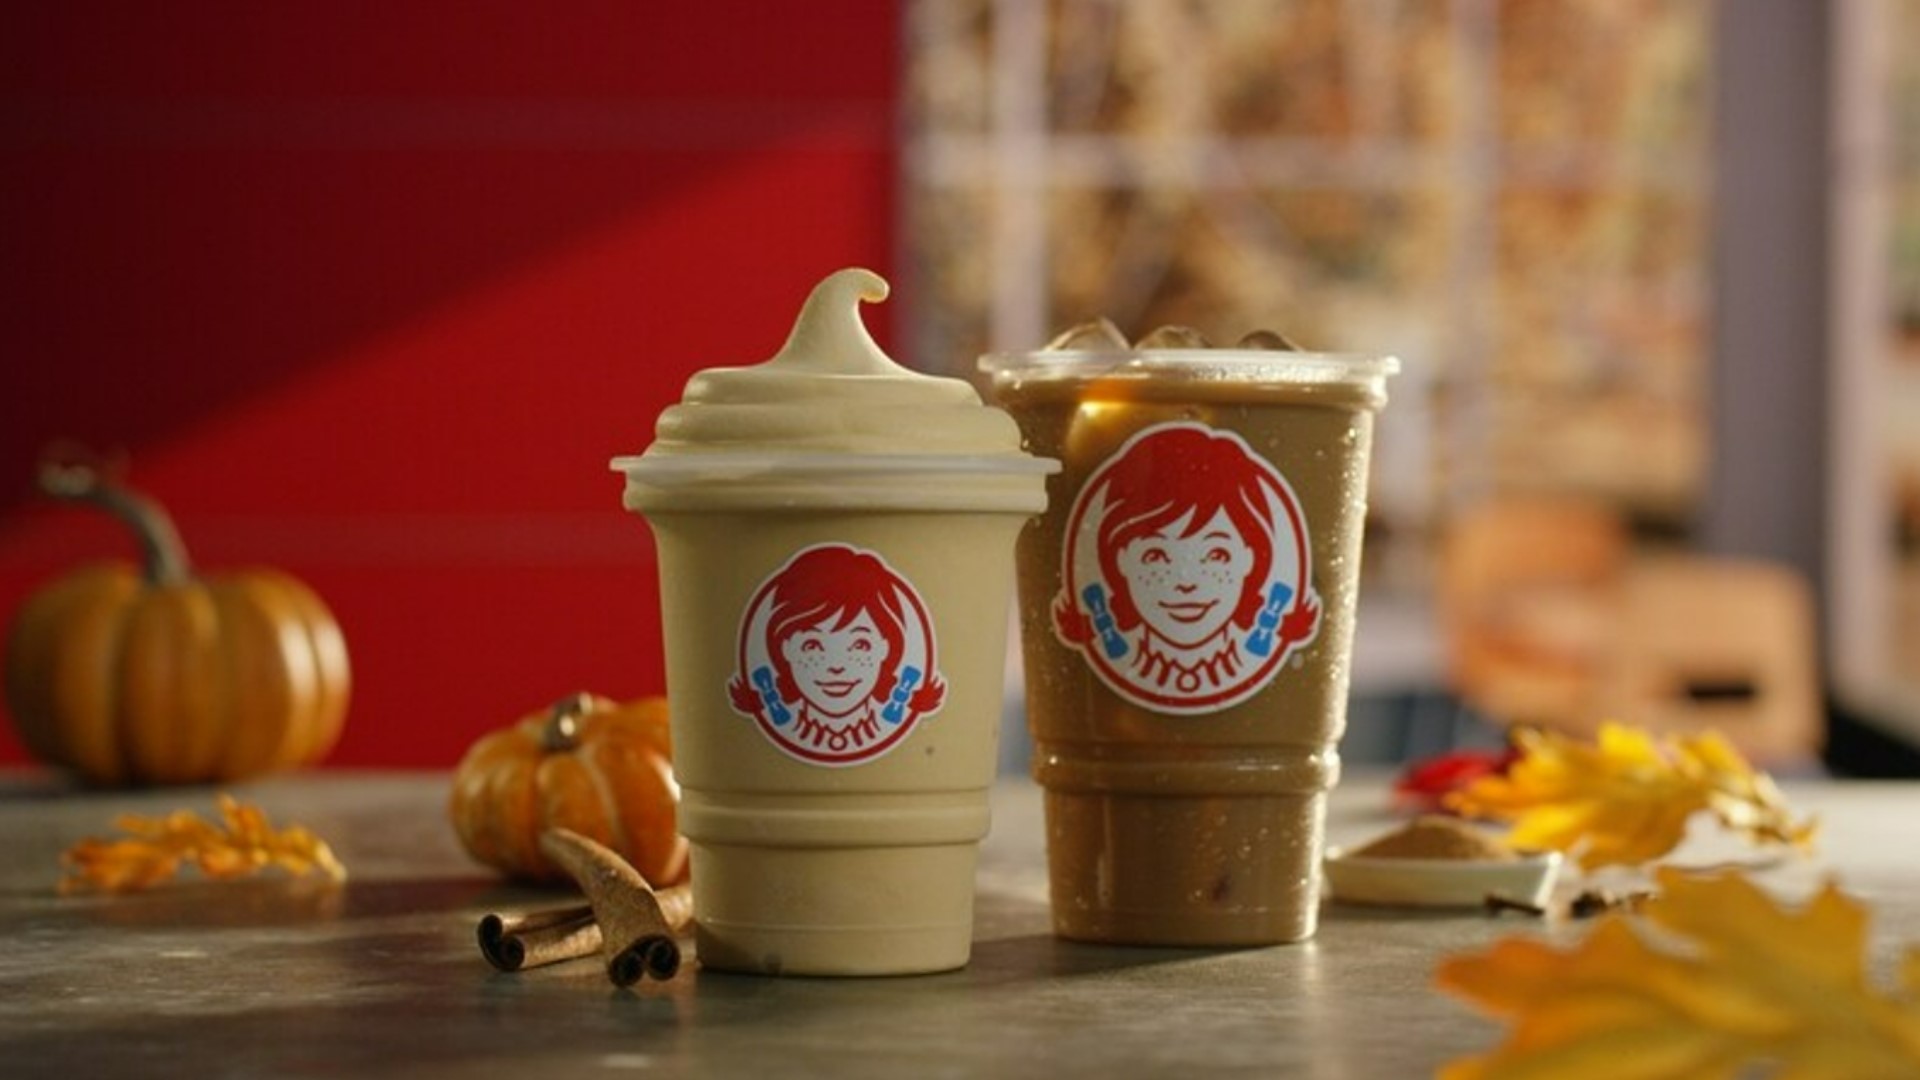 Starting on Sept. 12 for a limited time, customers can order a Pumpkin Spice Frosty or a Pumpkin Spice Frosty Cold Brew.